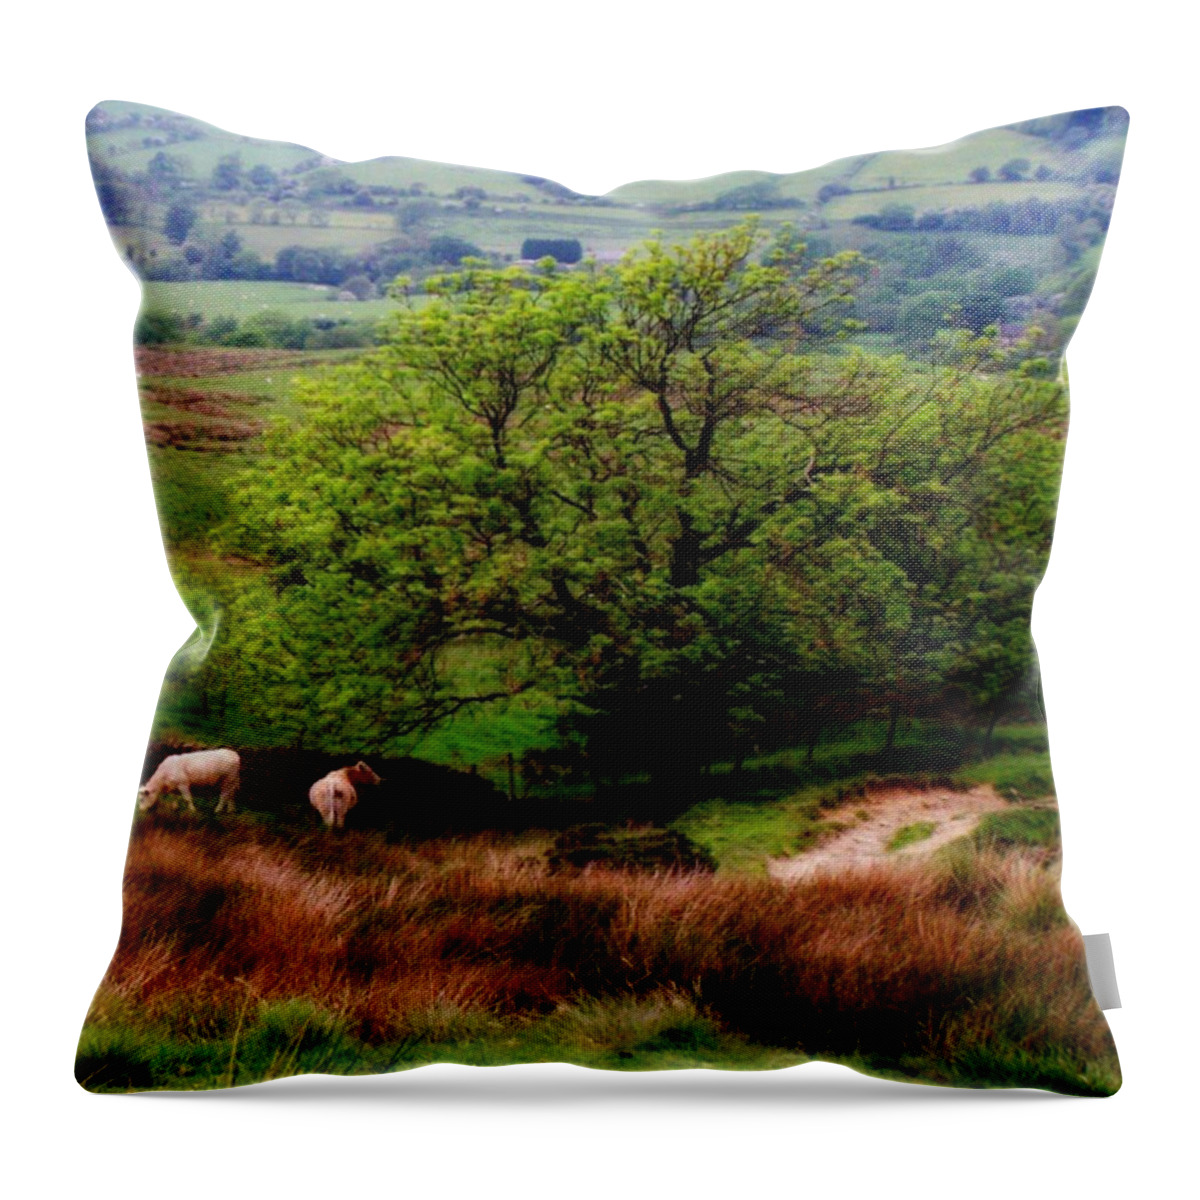 Cow Throw Pillow featuring the photograph Country File by Abbie Shores